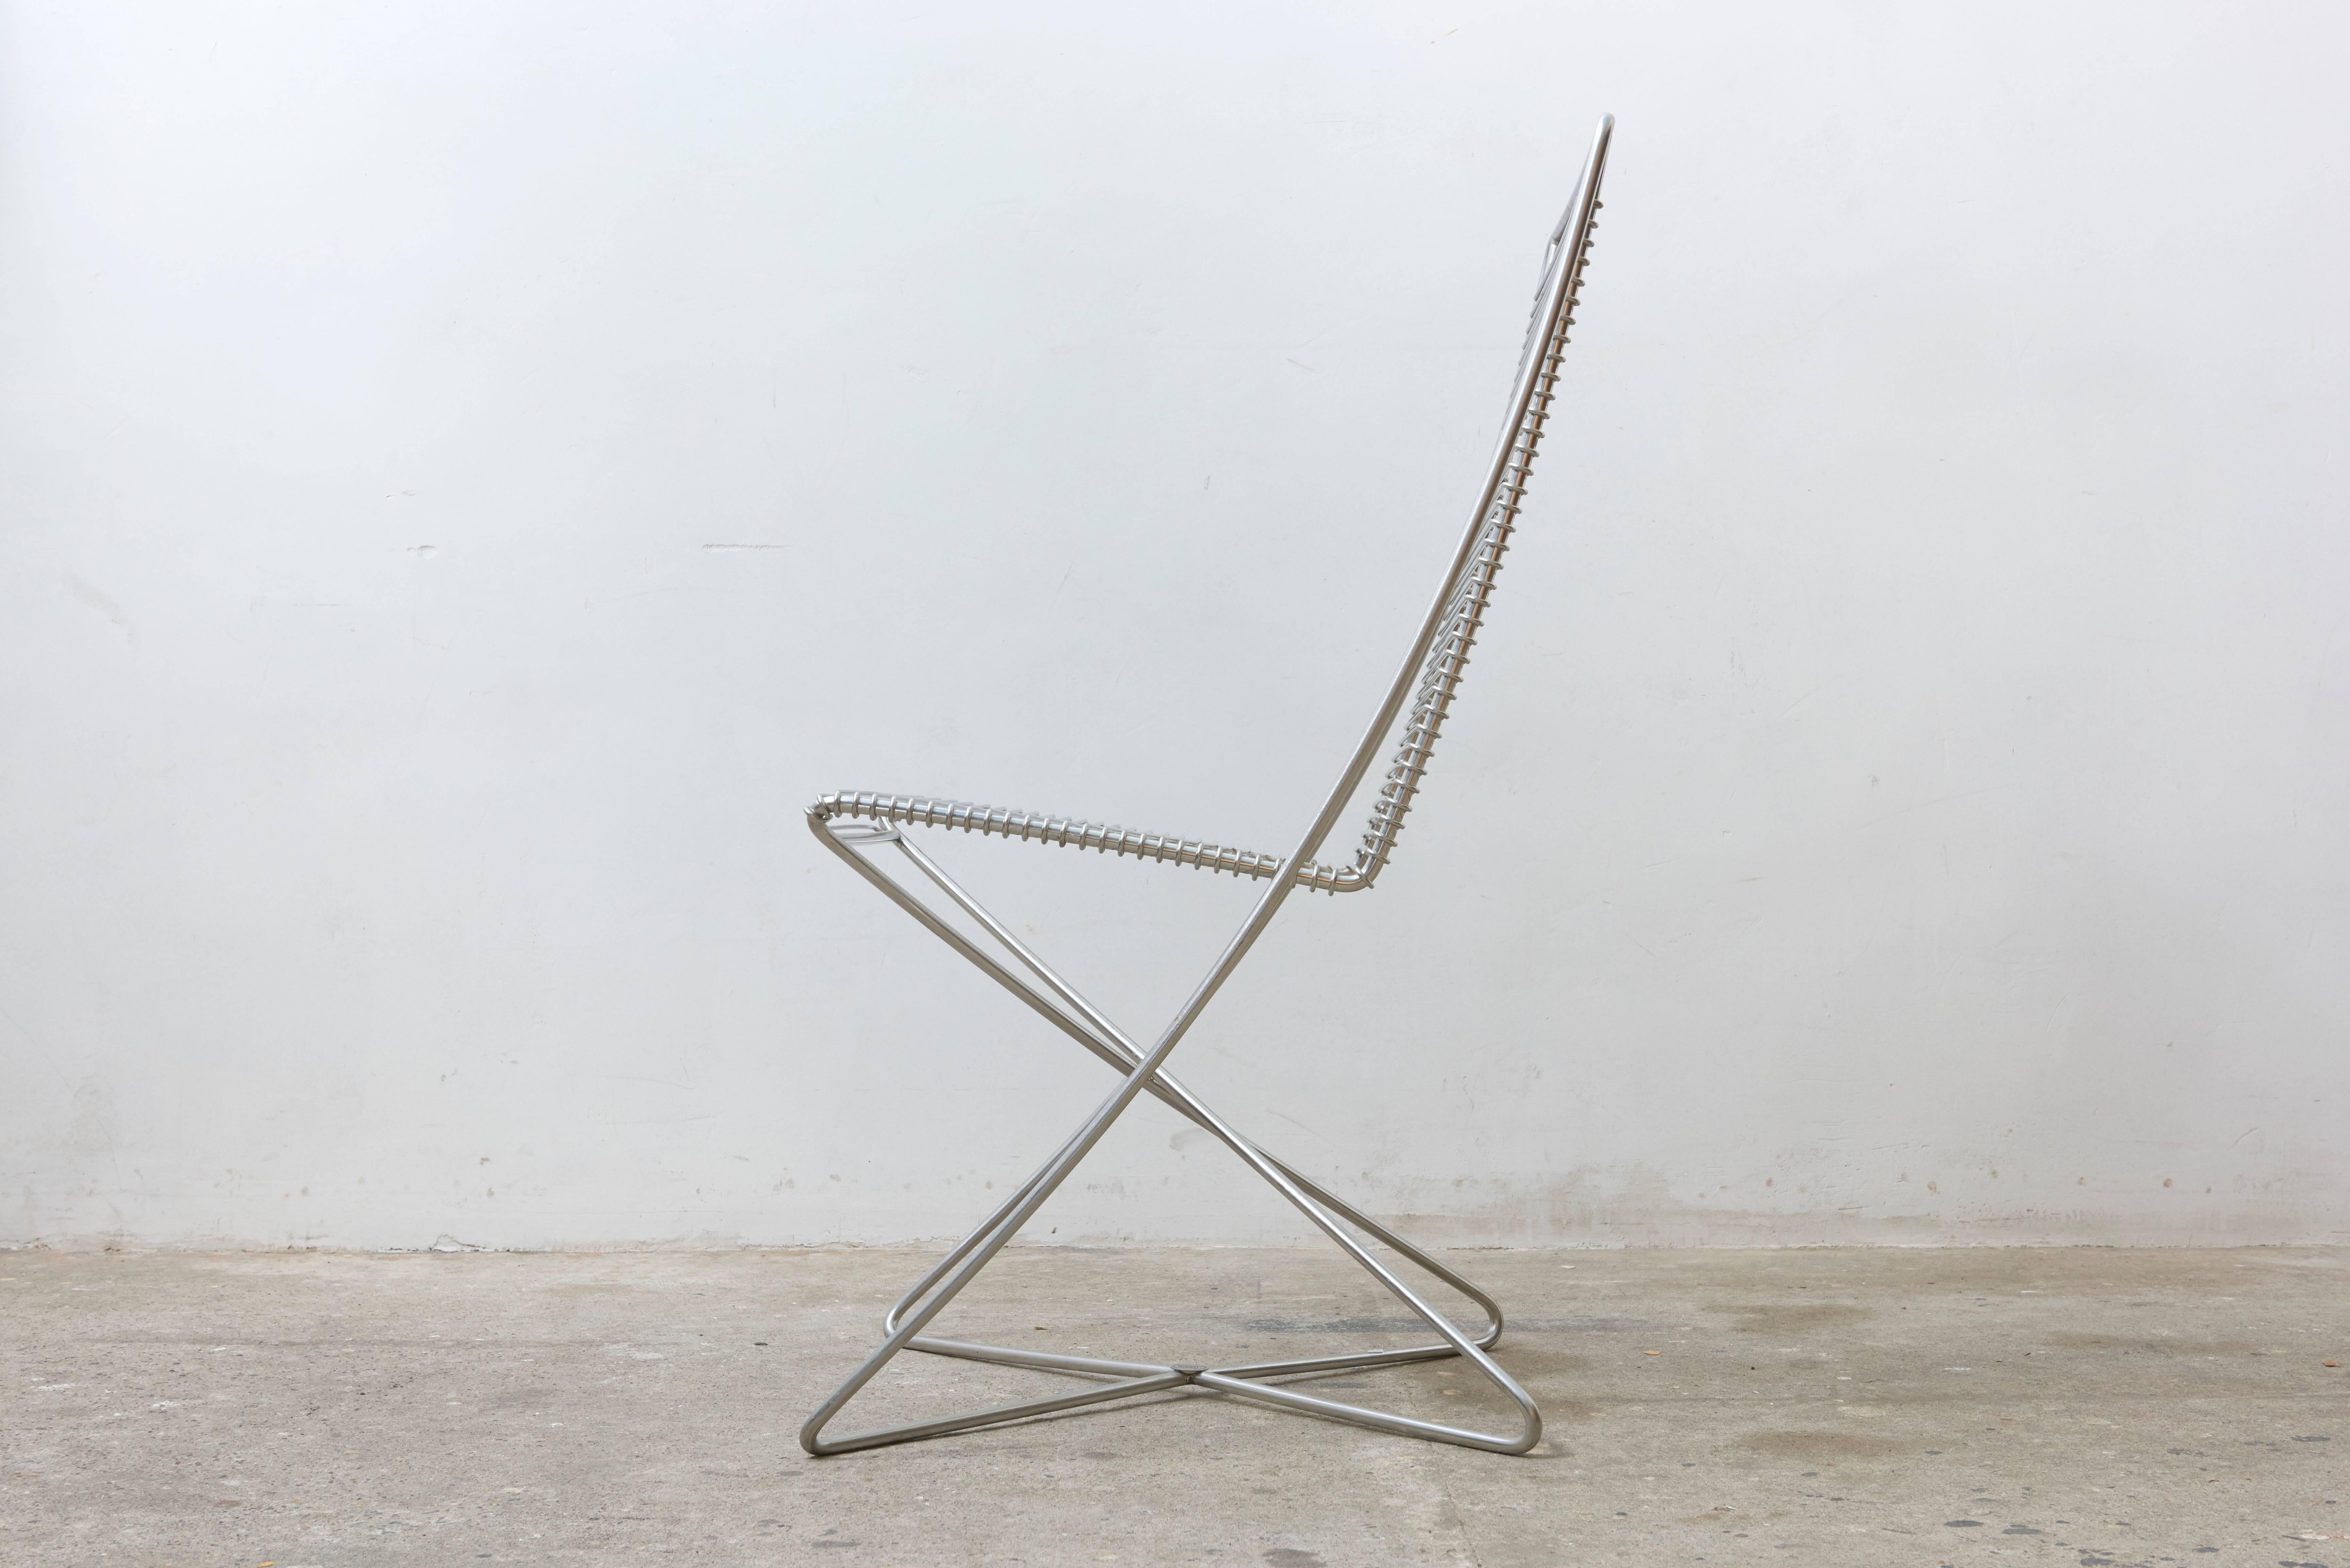 Beautiful set of two chairs were made of chromed steel wire and are named Kreuzschwinger.
They are medically, ergonomically designed and labelled by Till Behrens for Schlubach, Germany. 
 
The Kreuzschwinger forces not static, but a dynamic posture